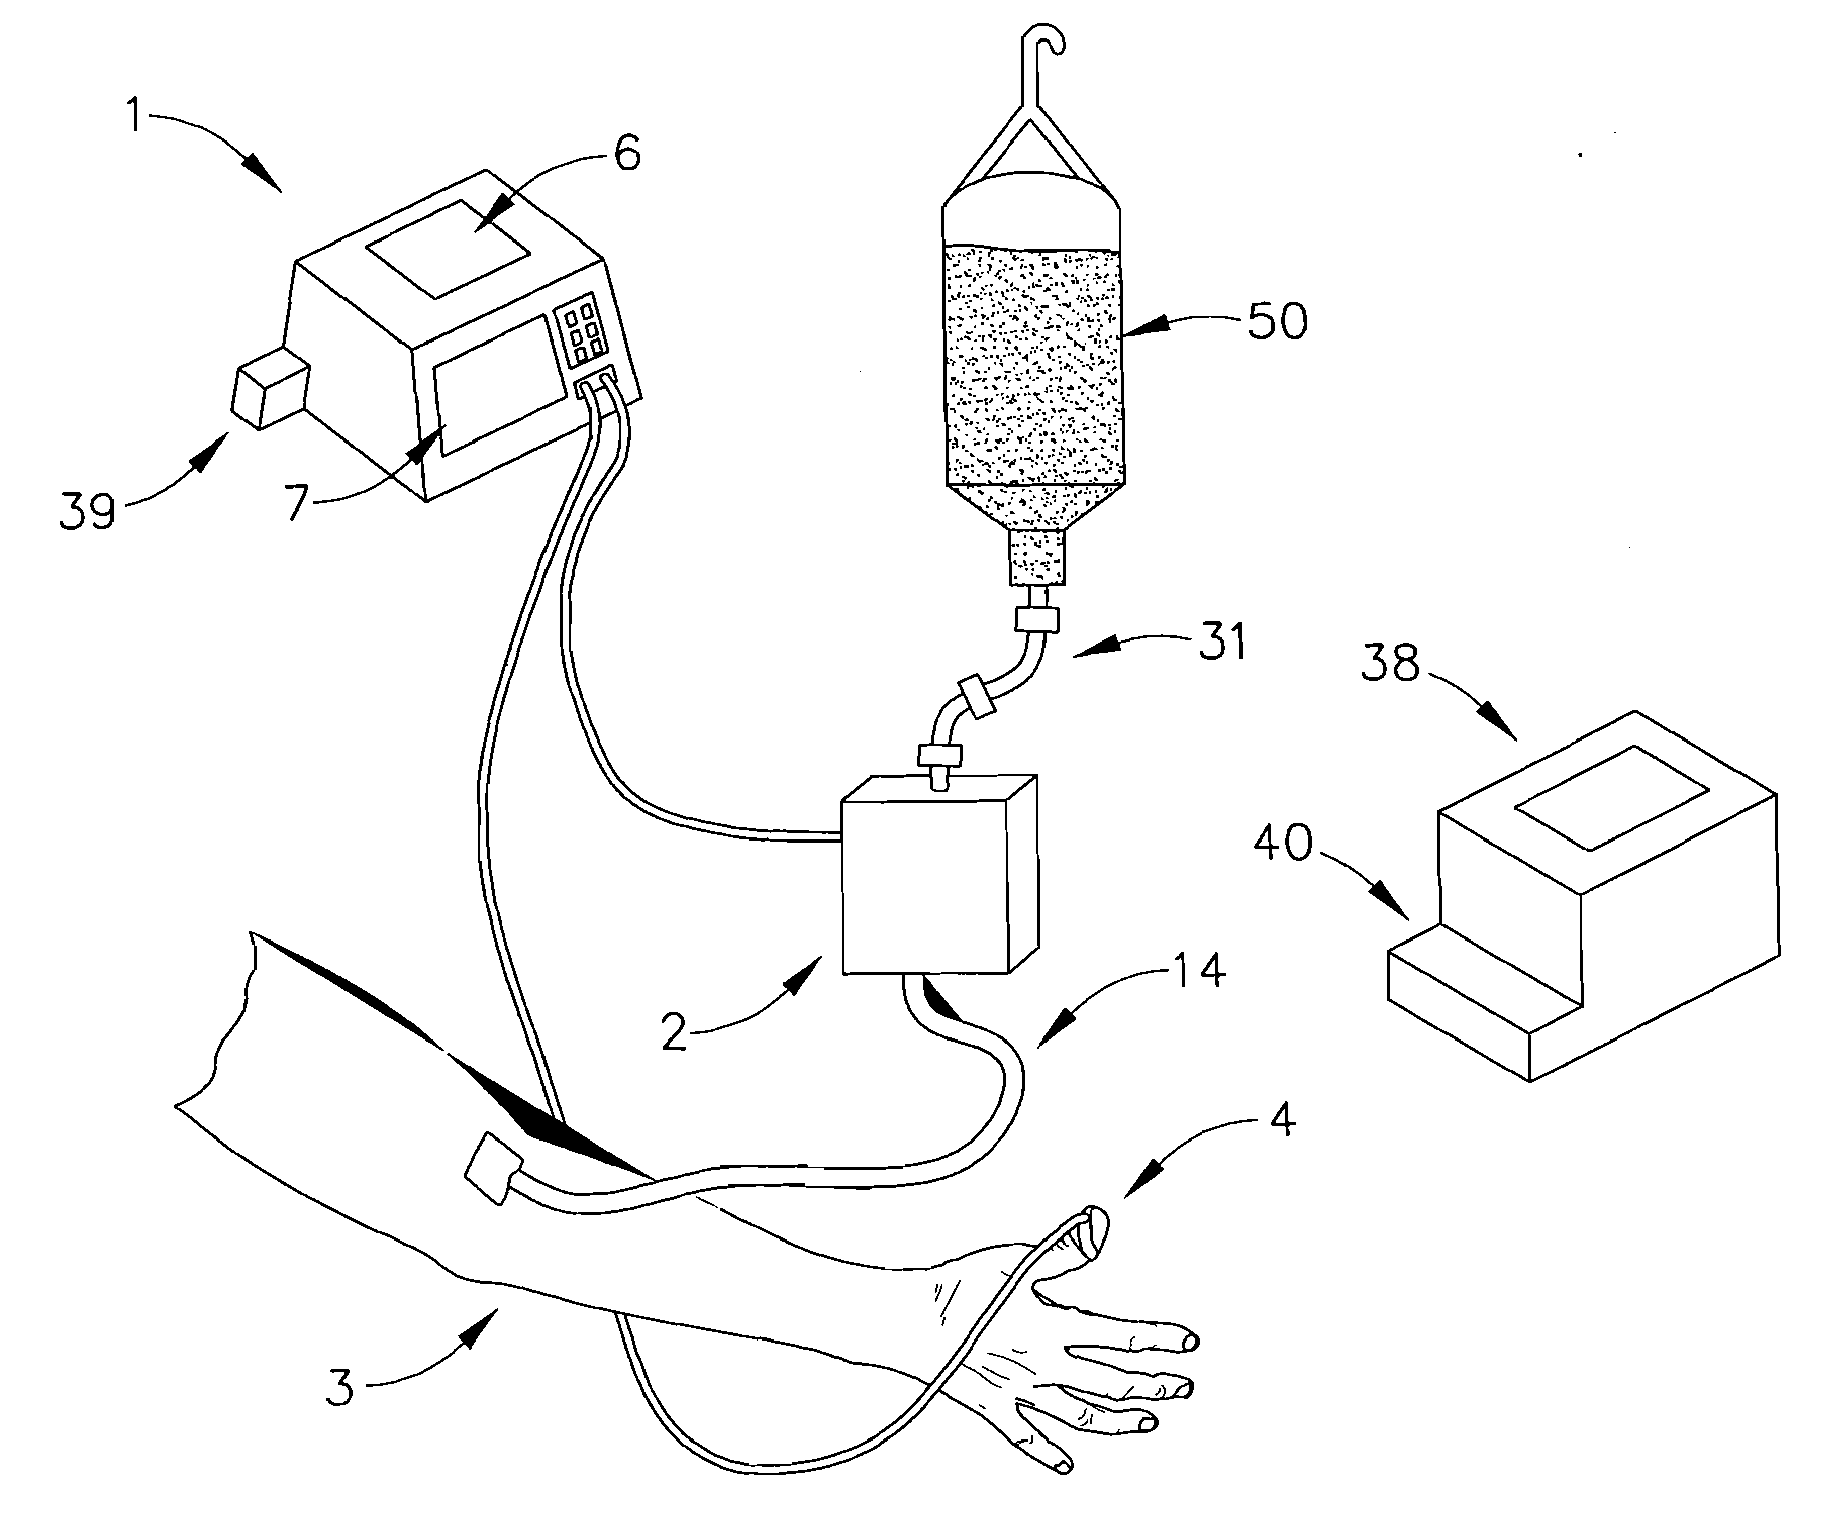 Apparatus and methods for controlling and automating fluid infusion activities